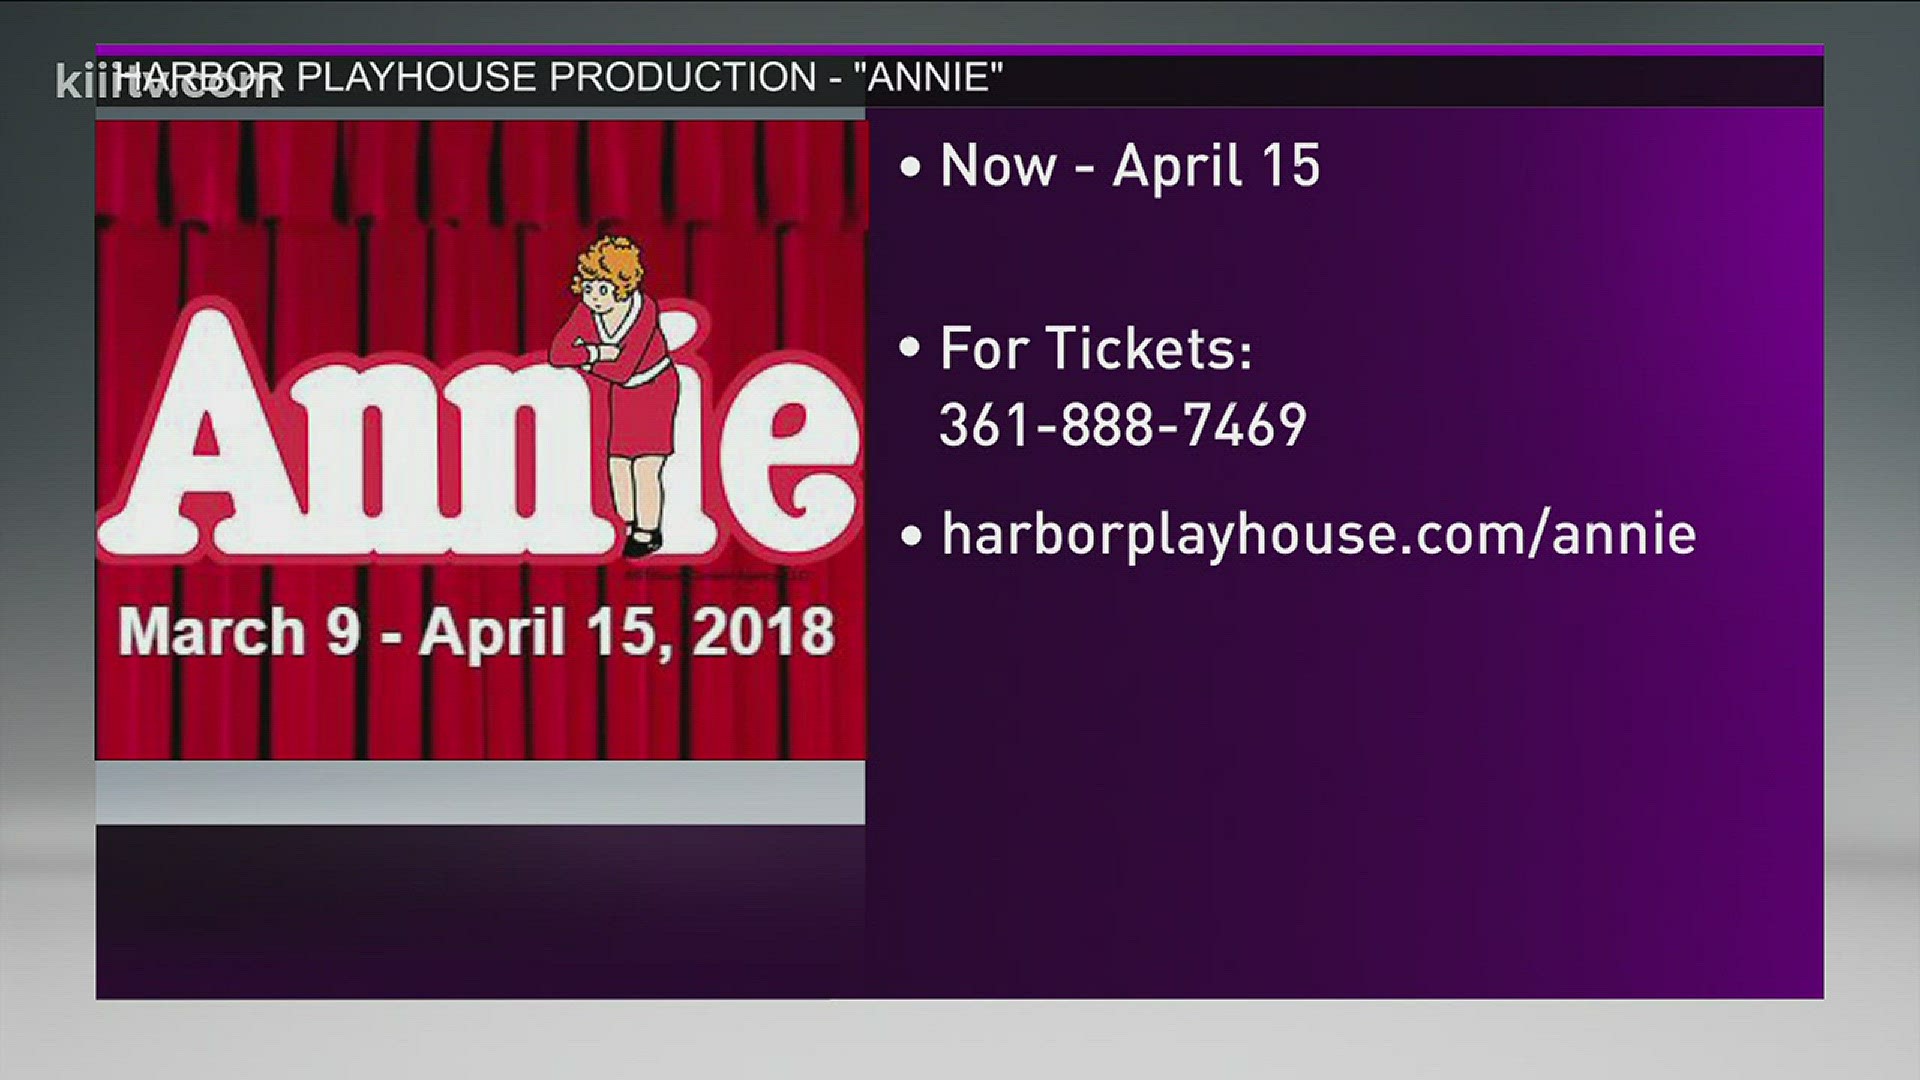 The hit film takes the main stage at the Harbor Playhouse.